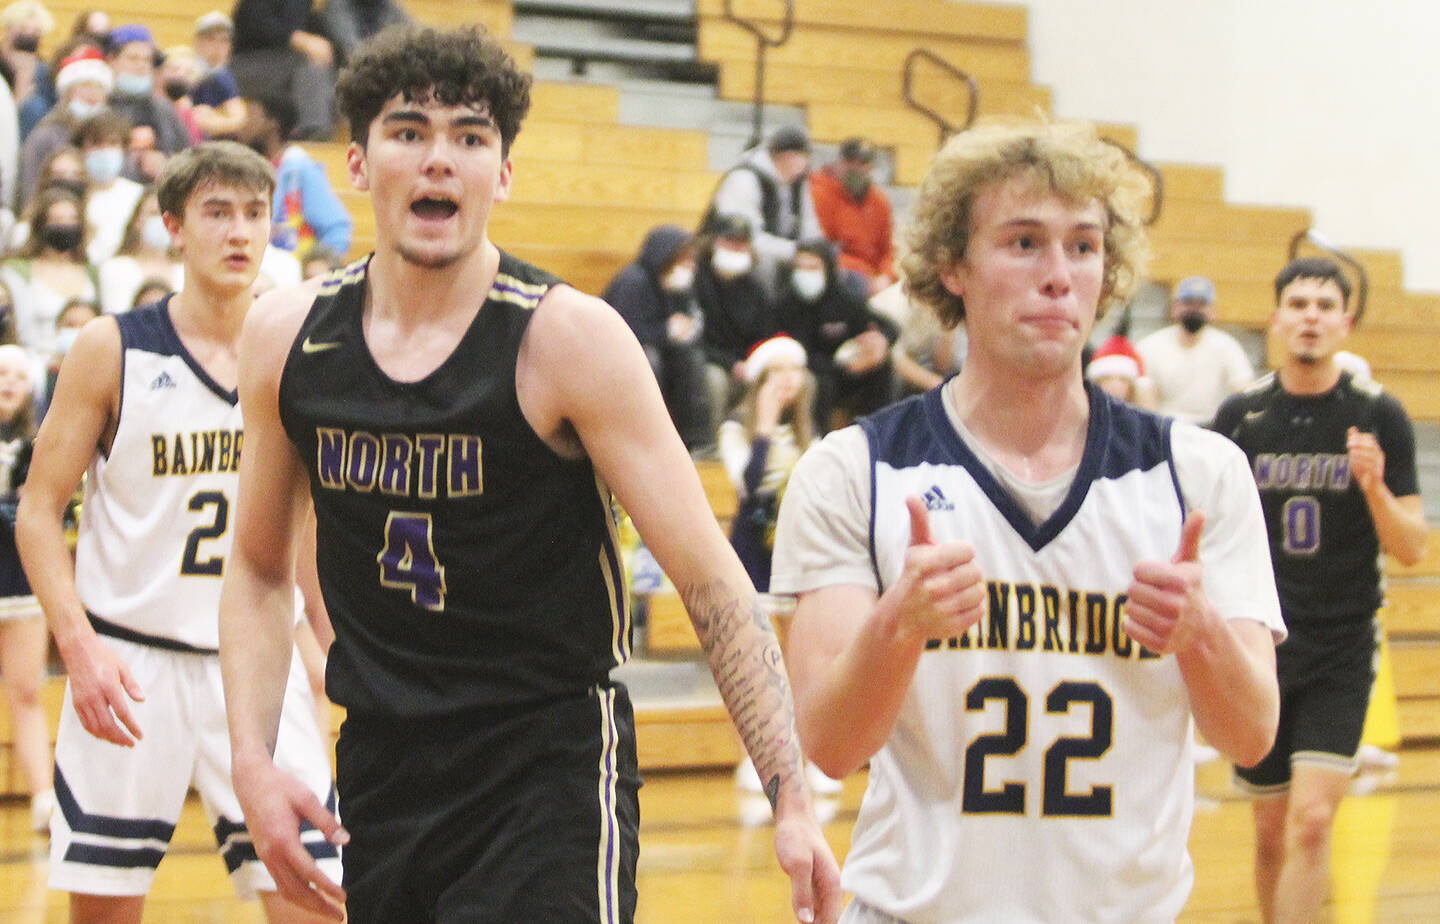 Brayden Morgan (22) of Bainbridge seems to agree with the call, while Jonas La Tour (4) of NK doesn’t look too sure.